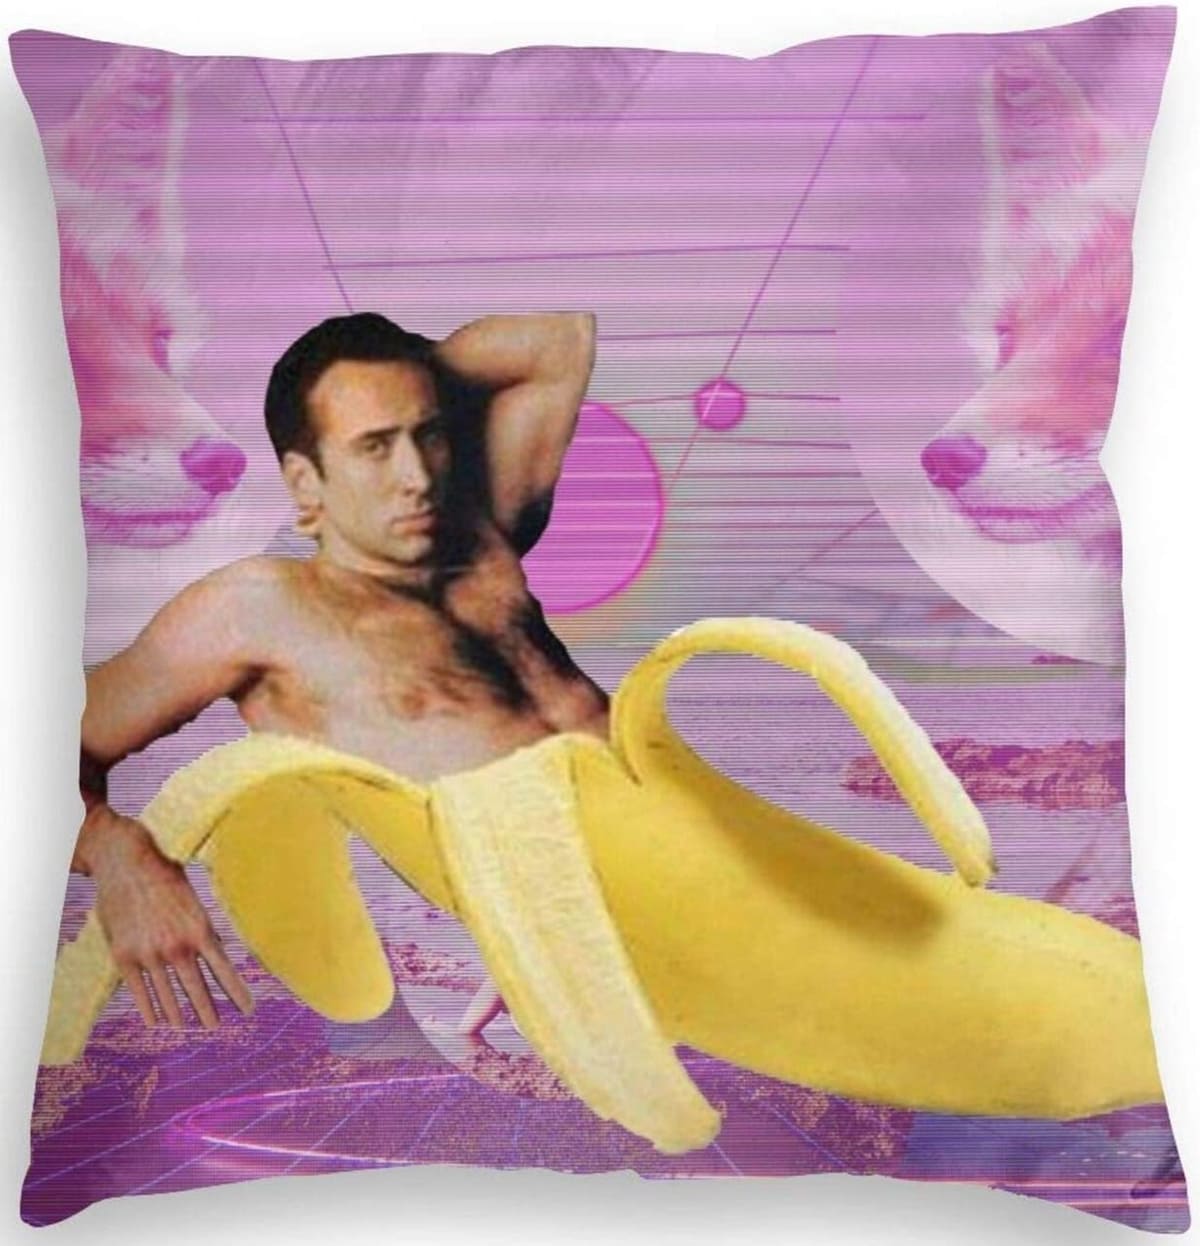 The Nicolas Cage banana pillow is soft and looks amazing